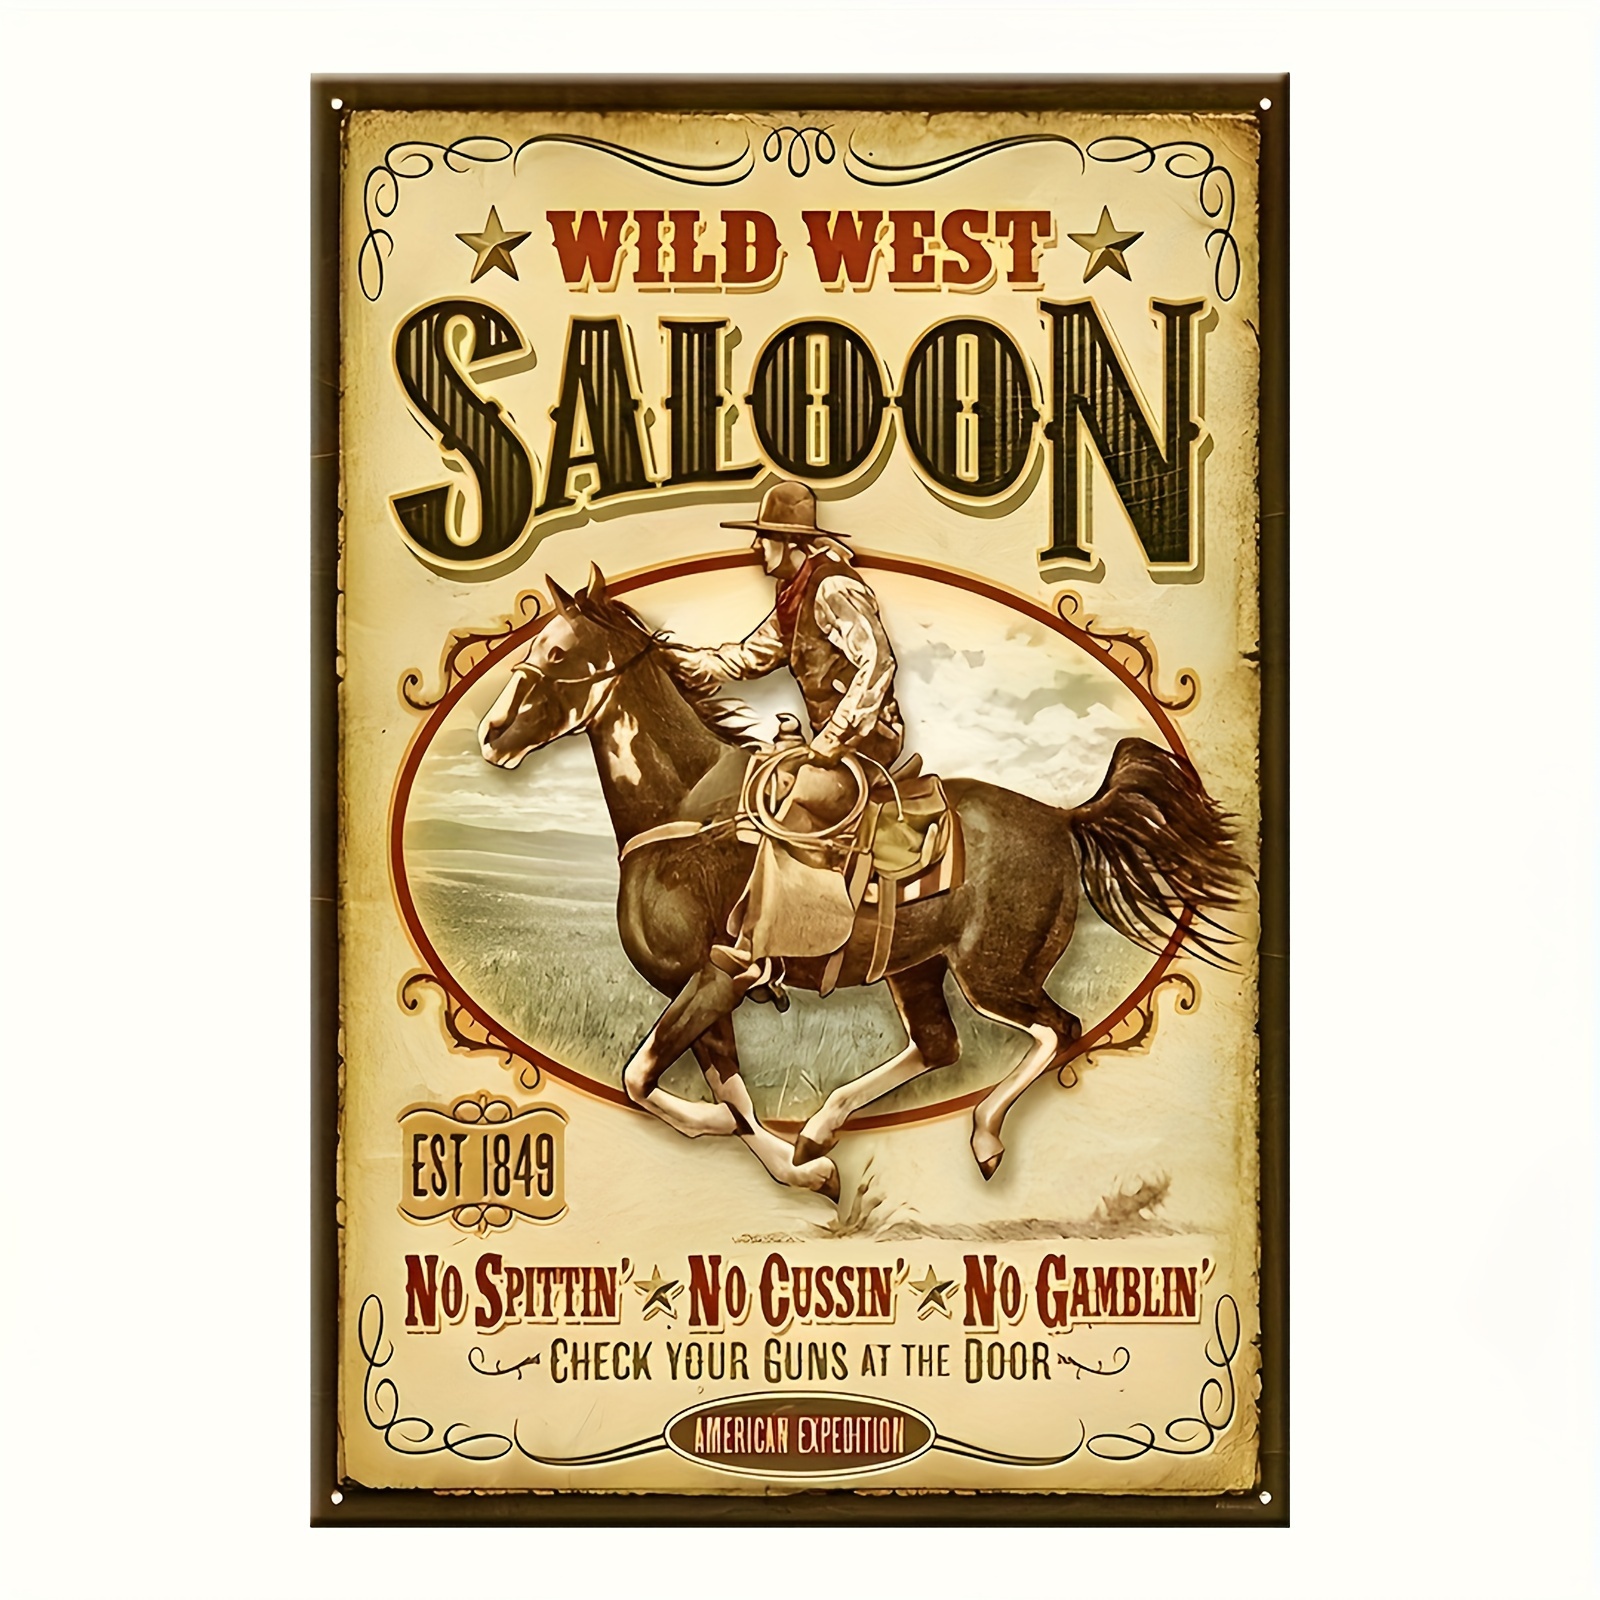 

Wild West Saloon Metal Tin Sign Vintage Wall Decor For Cafe Bar Pub Home 12x8 Inch Tinplate